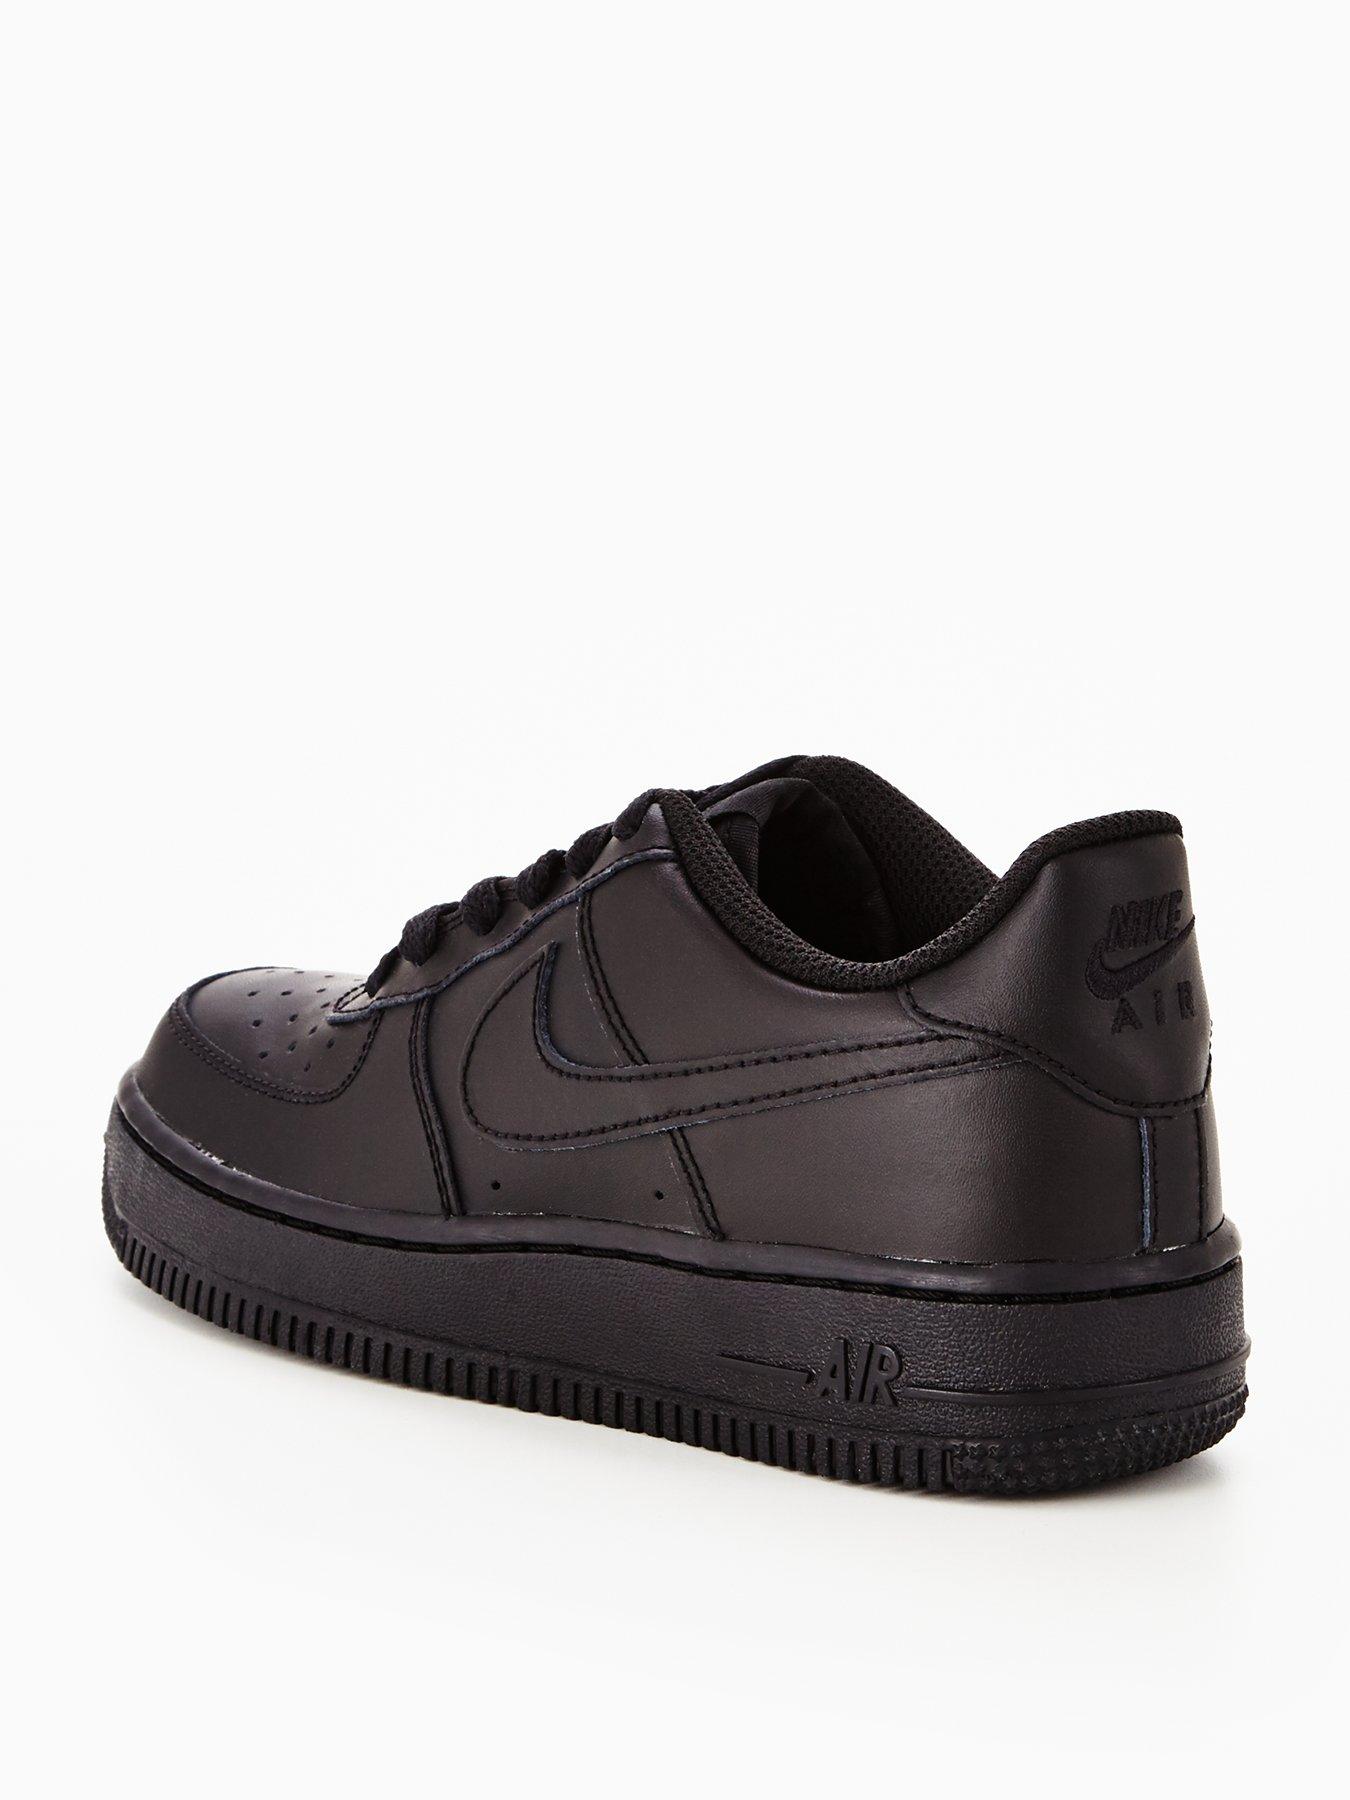 Nike Air Force 1 Childrens Trainers 